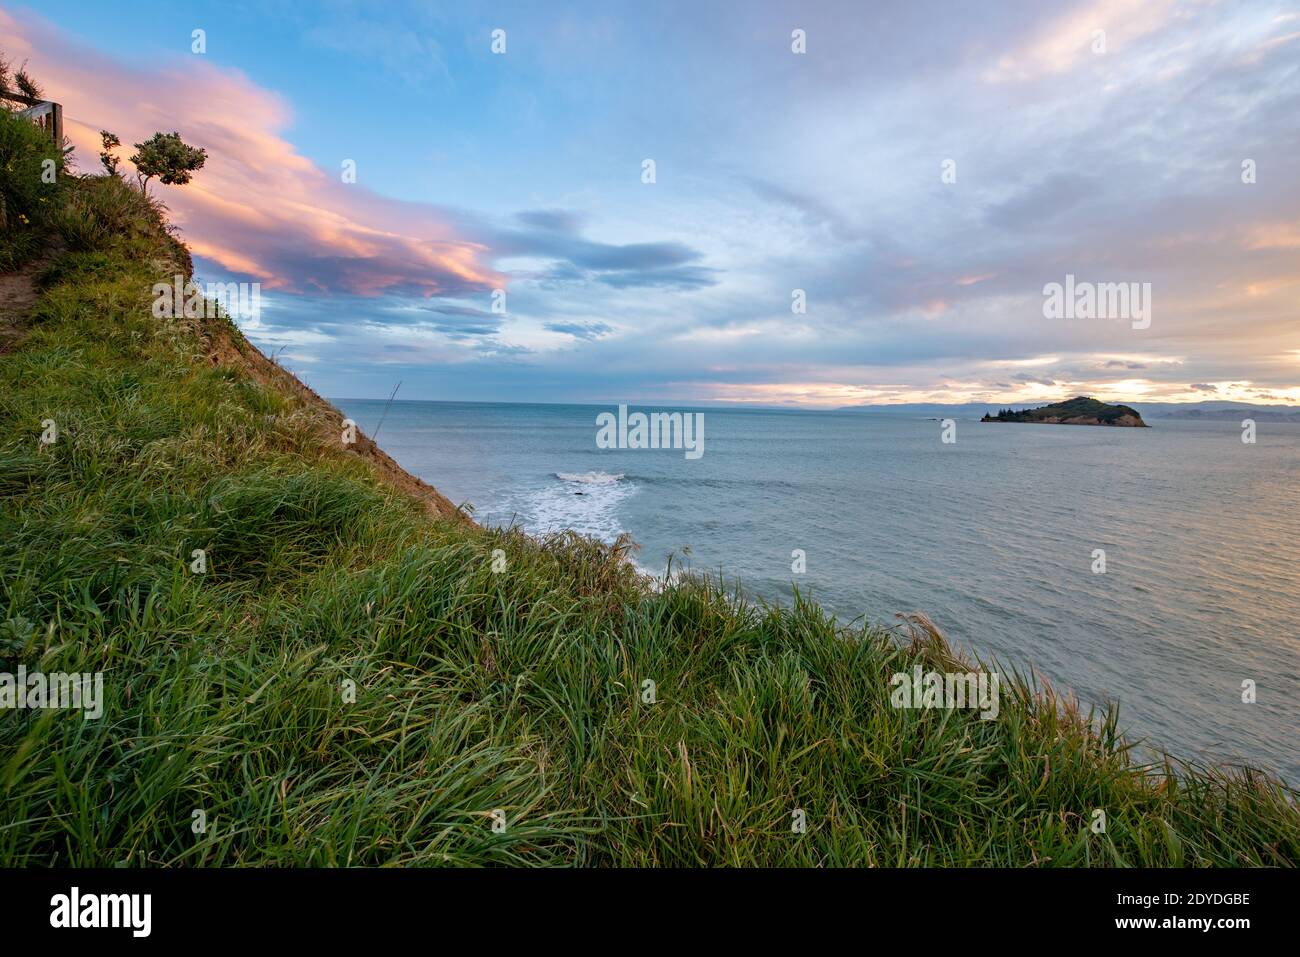 Grassy hillside at sunset under a colorful sky with the ocean in the background Stock Photo